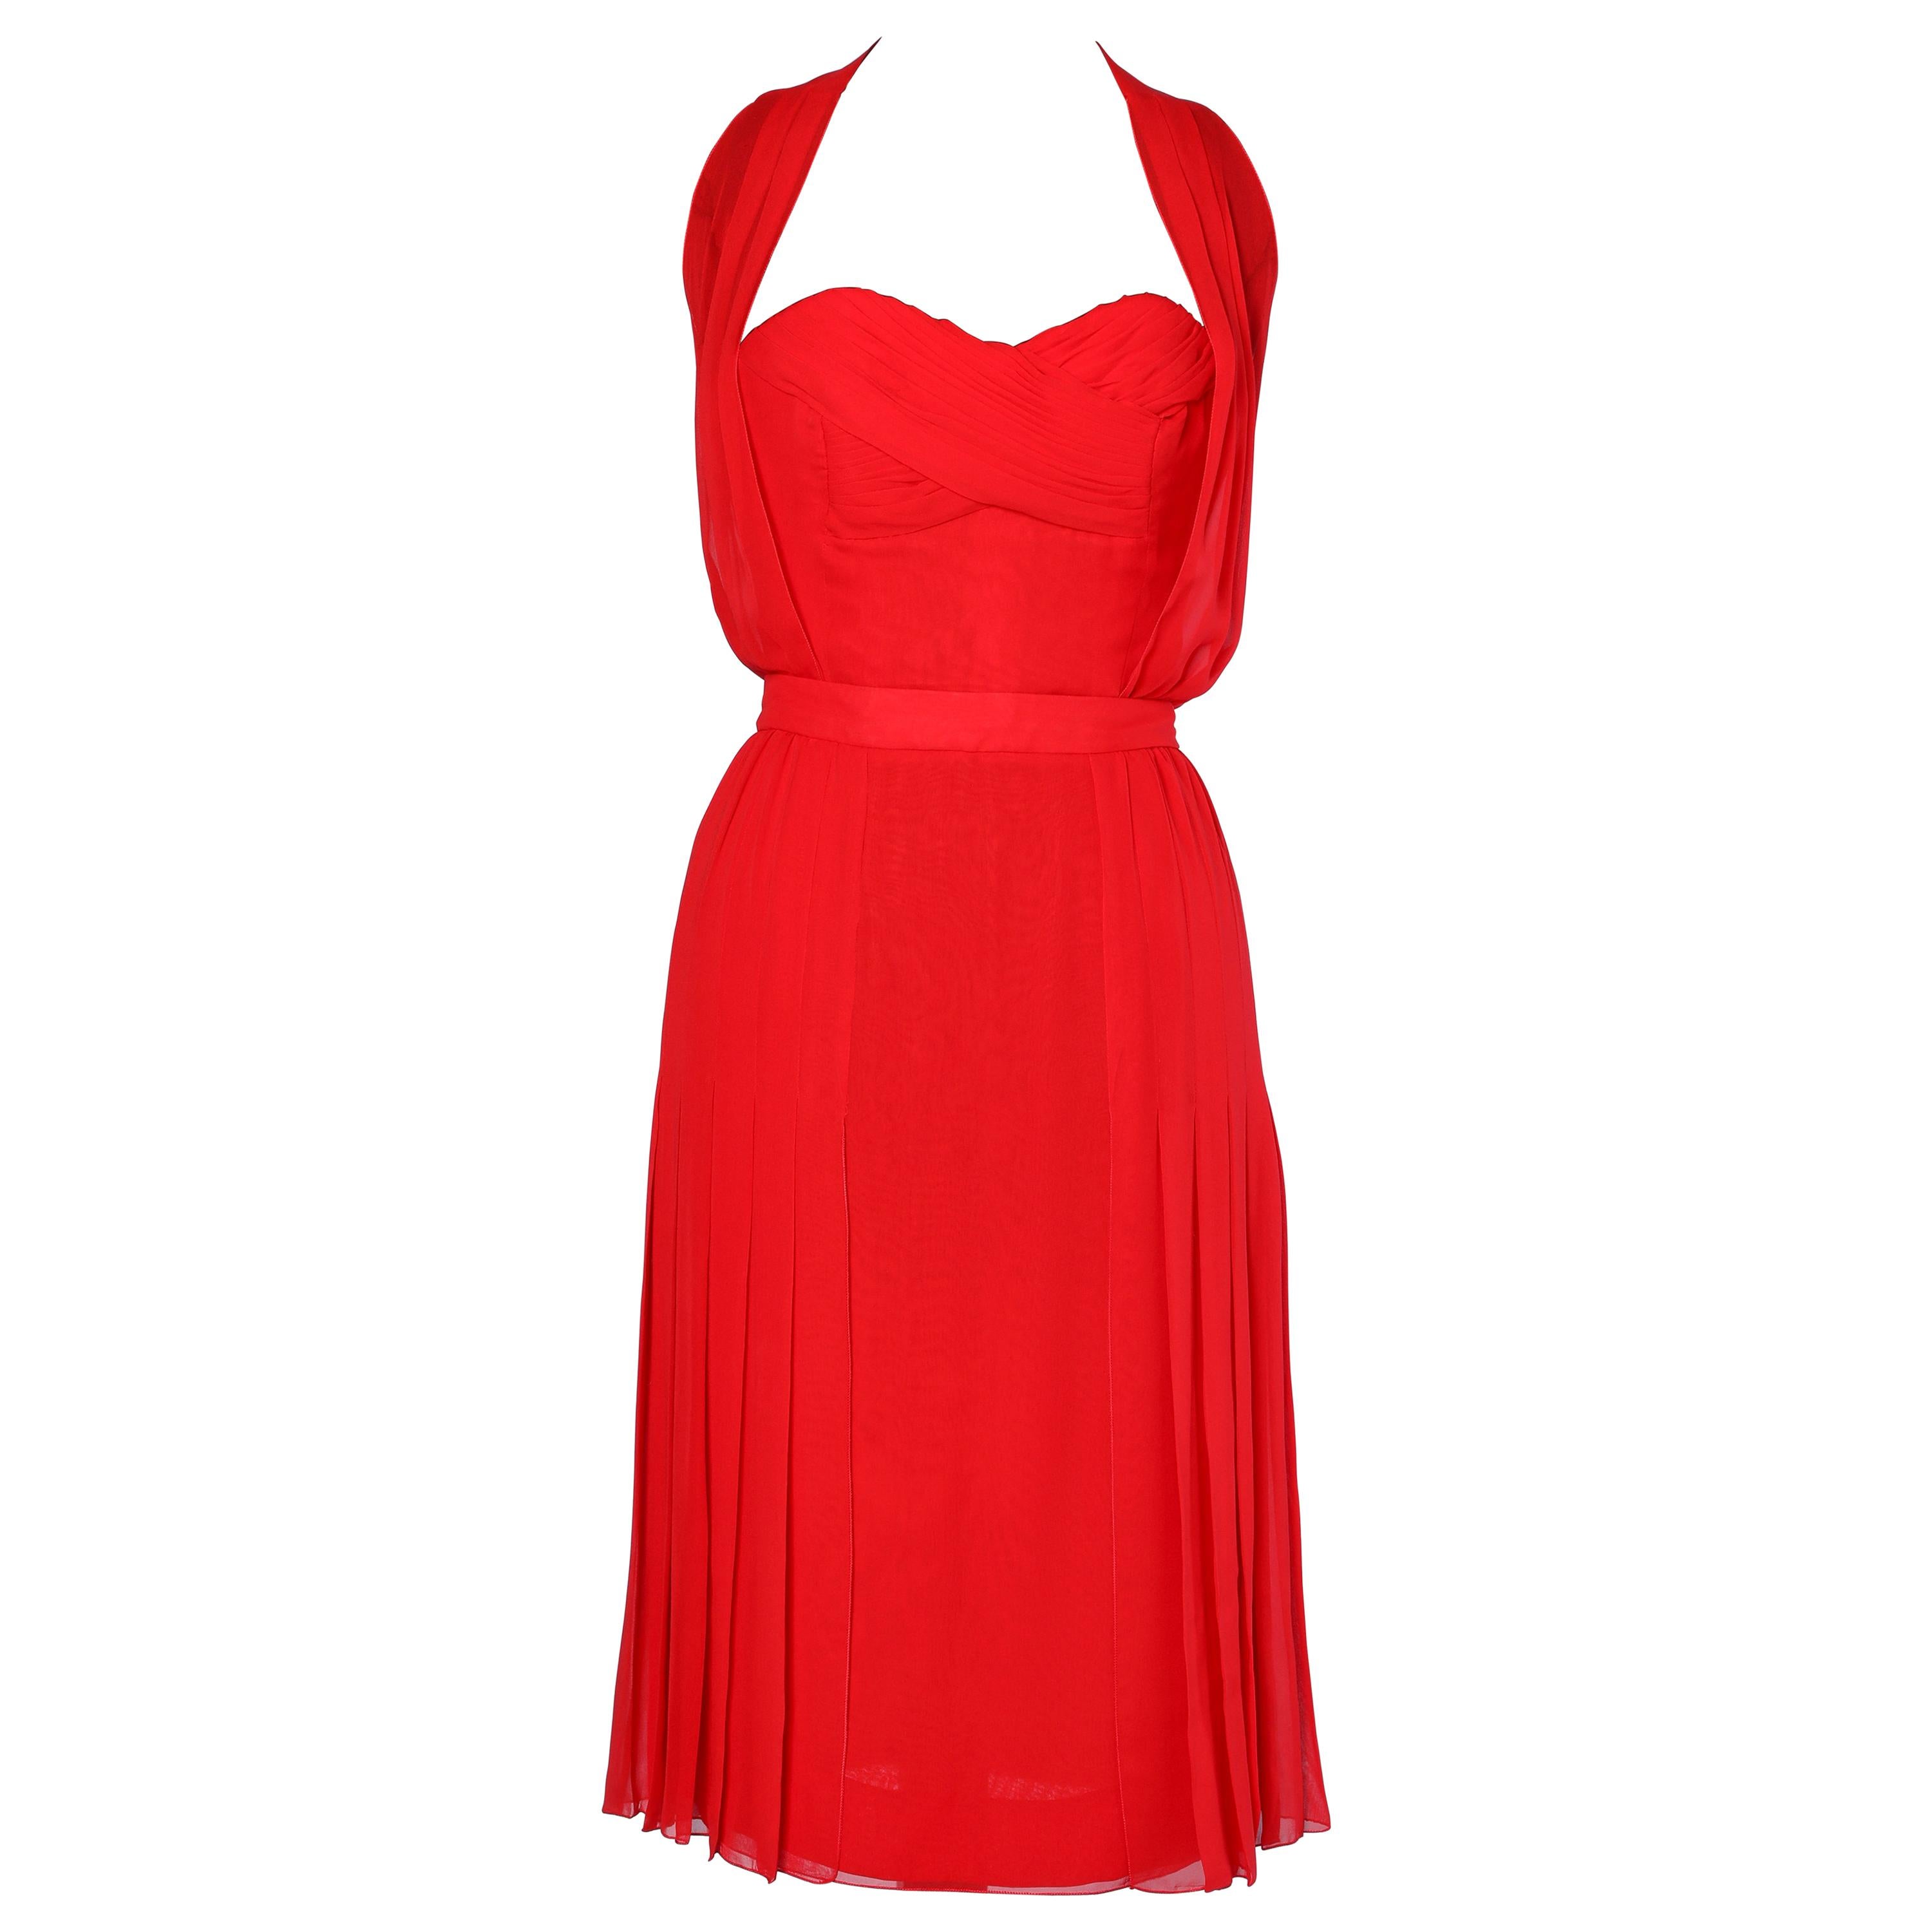 Chanel vintage  red chiffon cocktail  dress